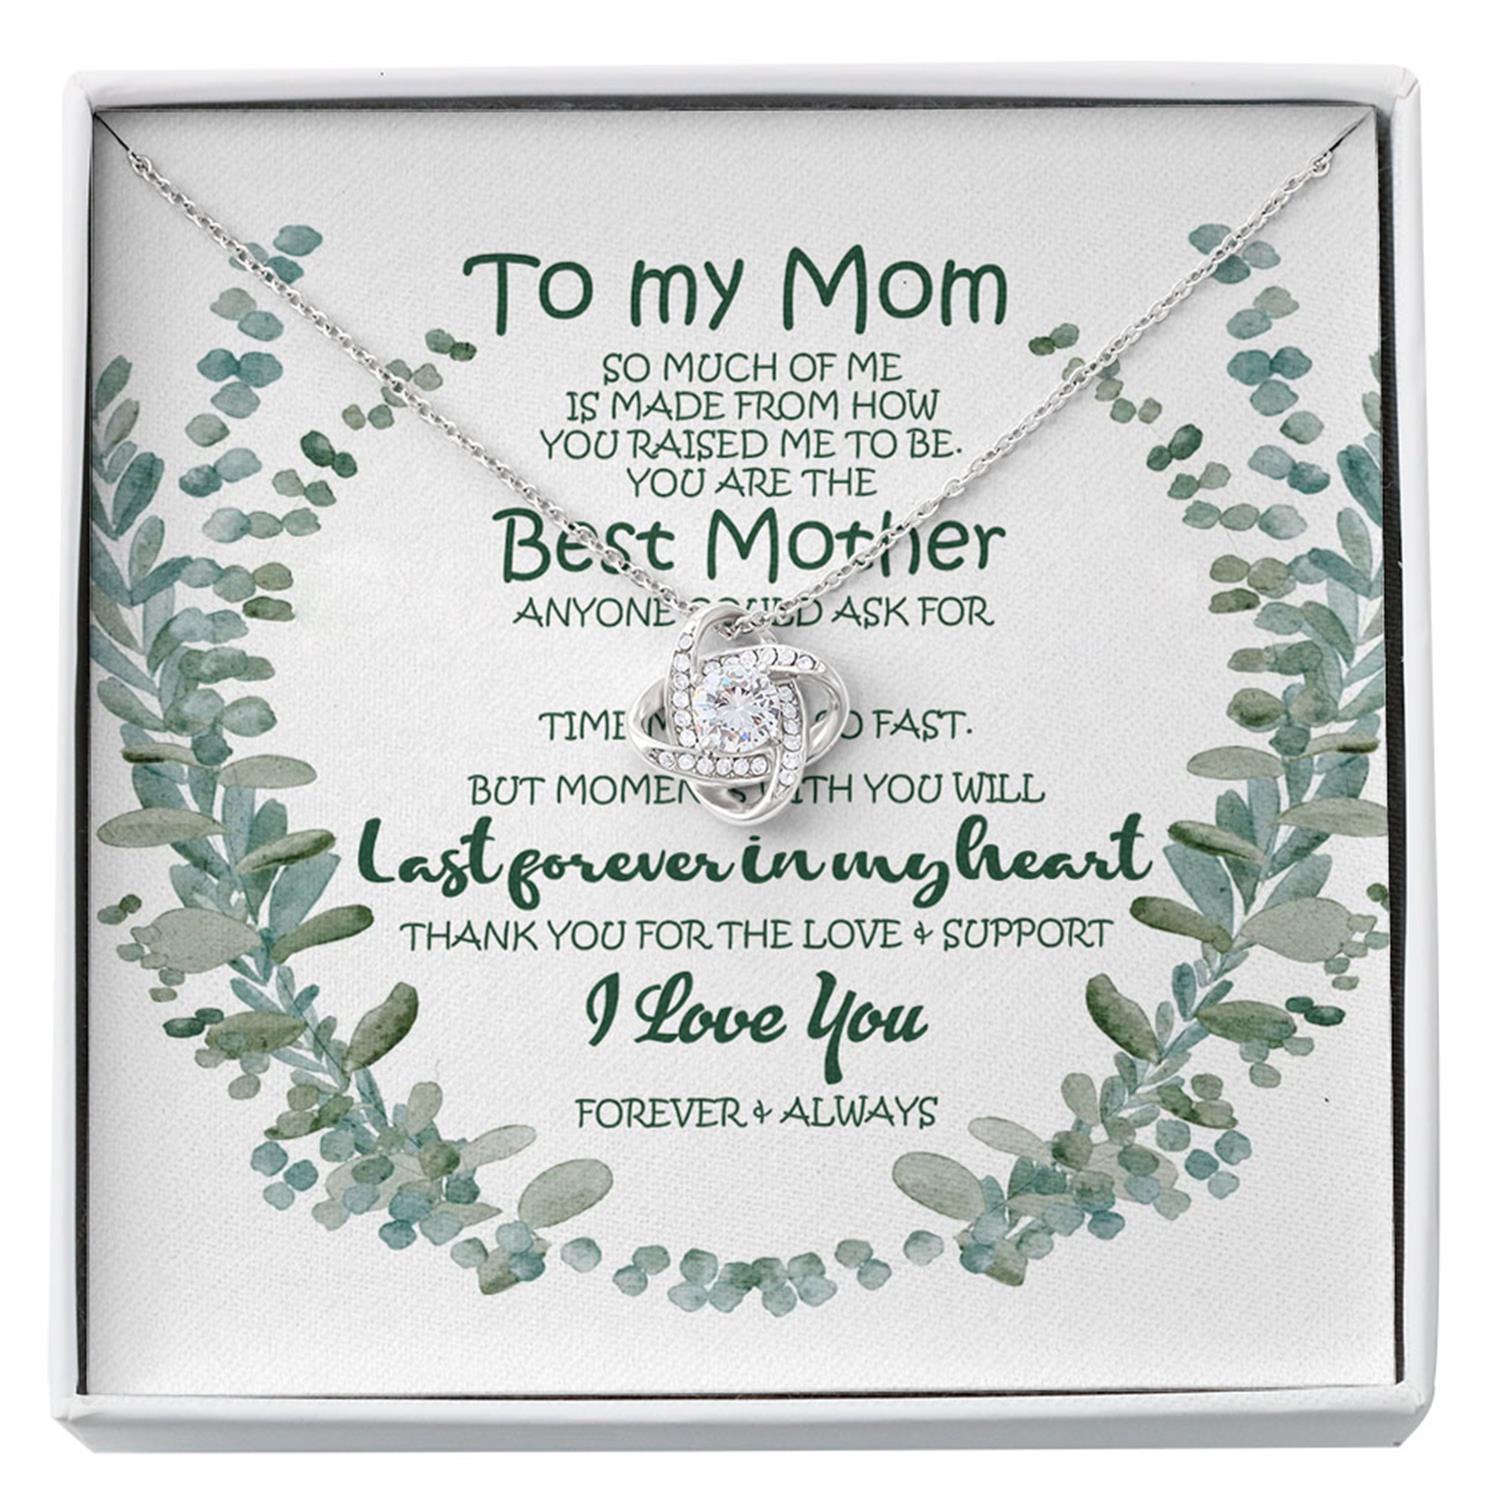 Mom Necklace, Gift For Mom, Mothers Day Gift, Mom Gift, Necklace For Mom, Mother Custom Necklace